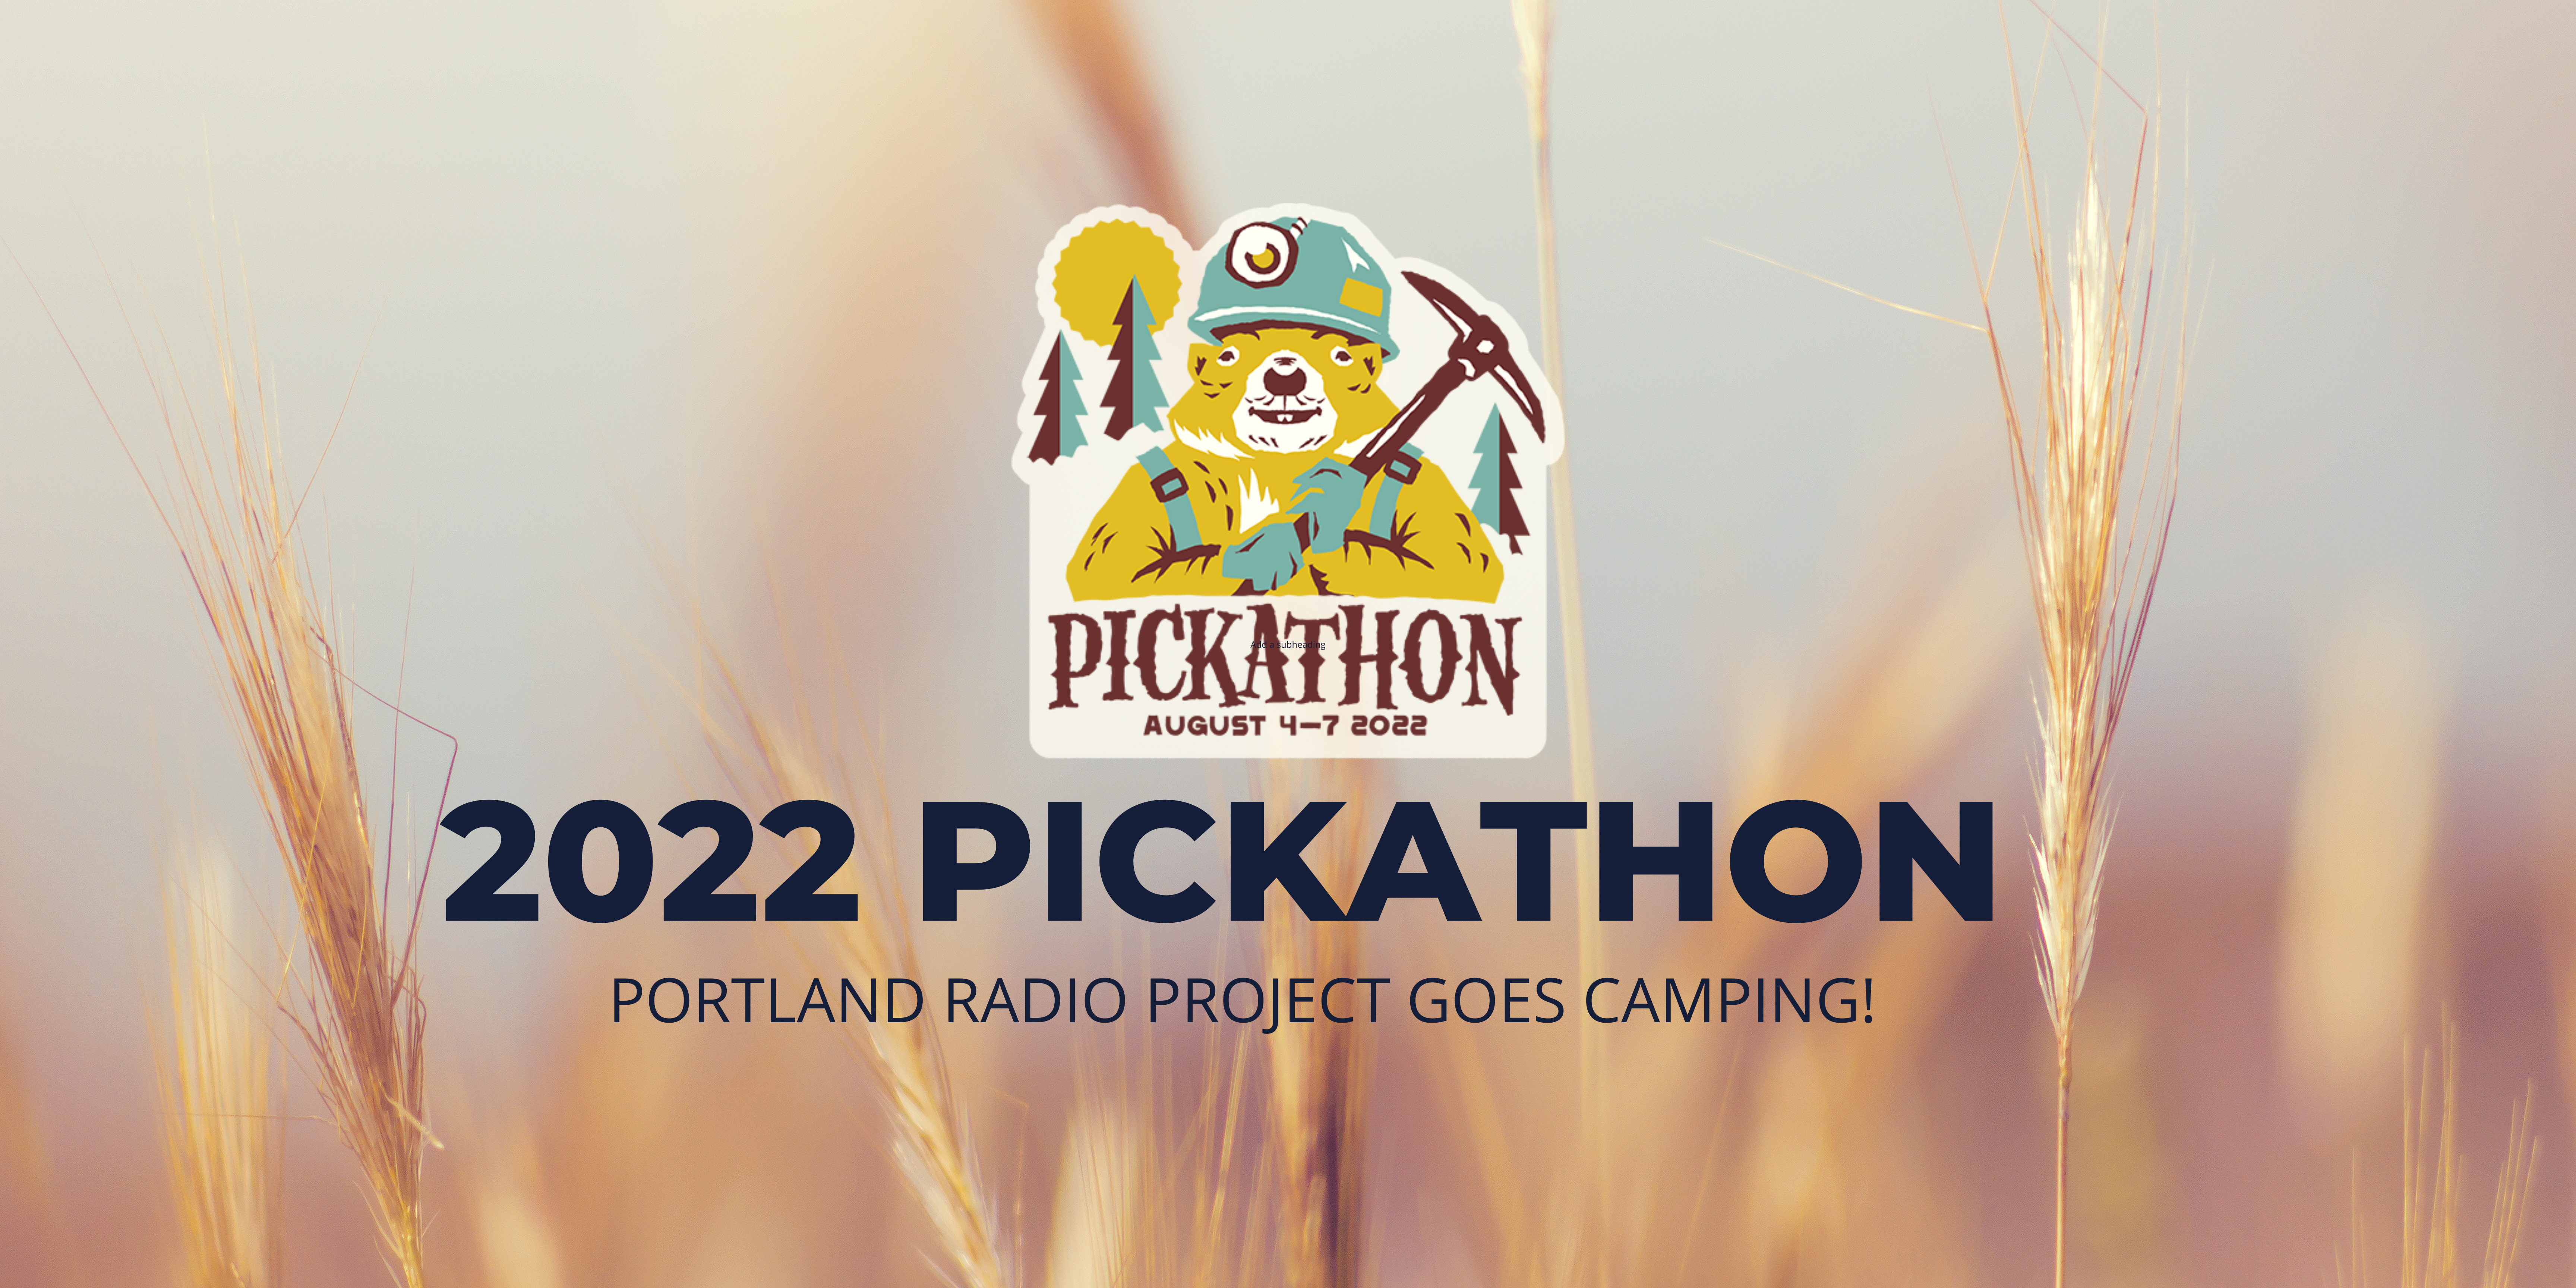 A Very New Pickathon in 2022